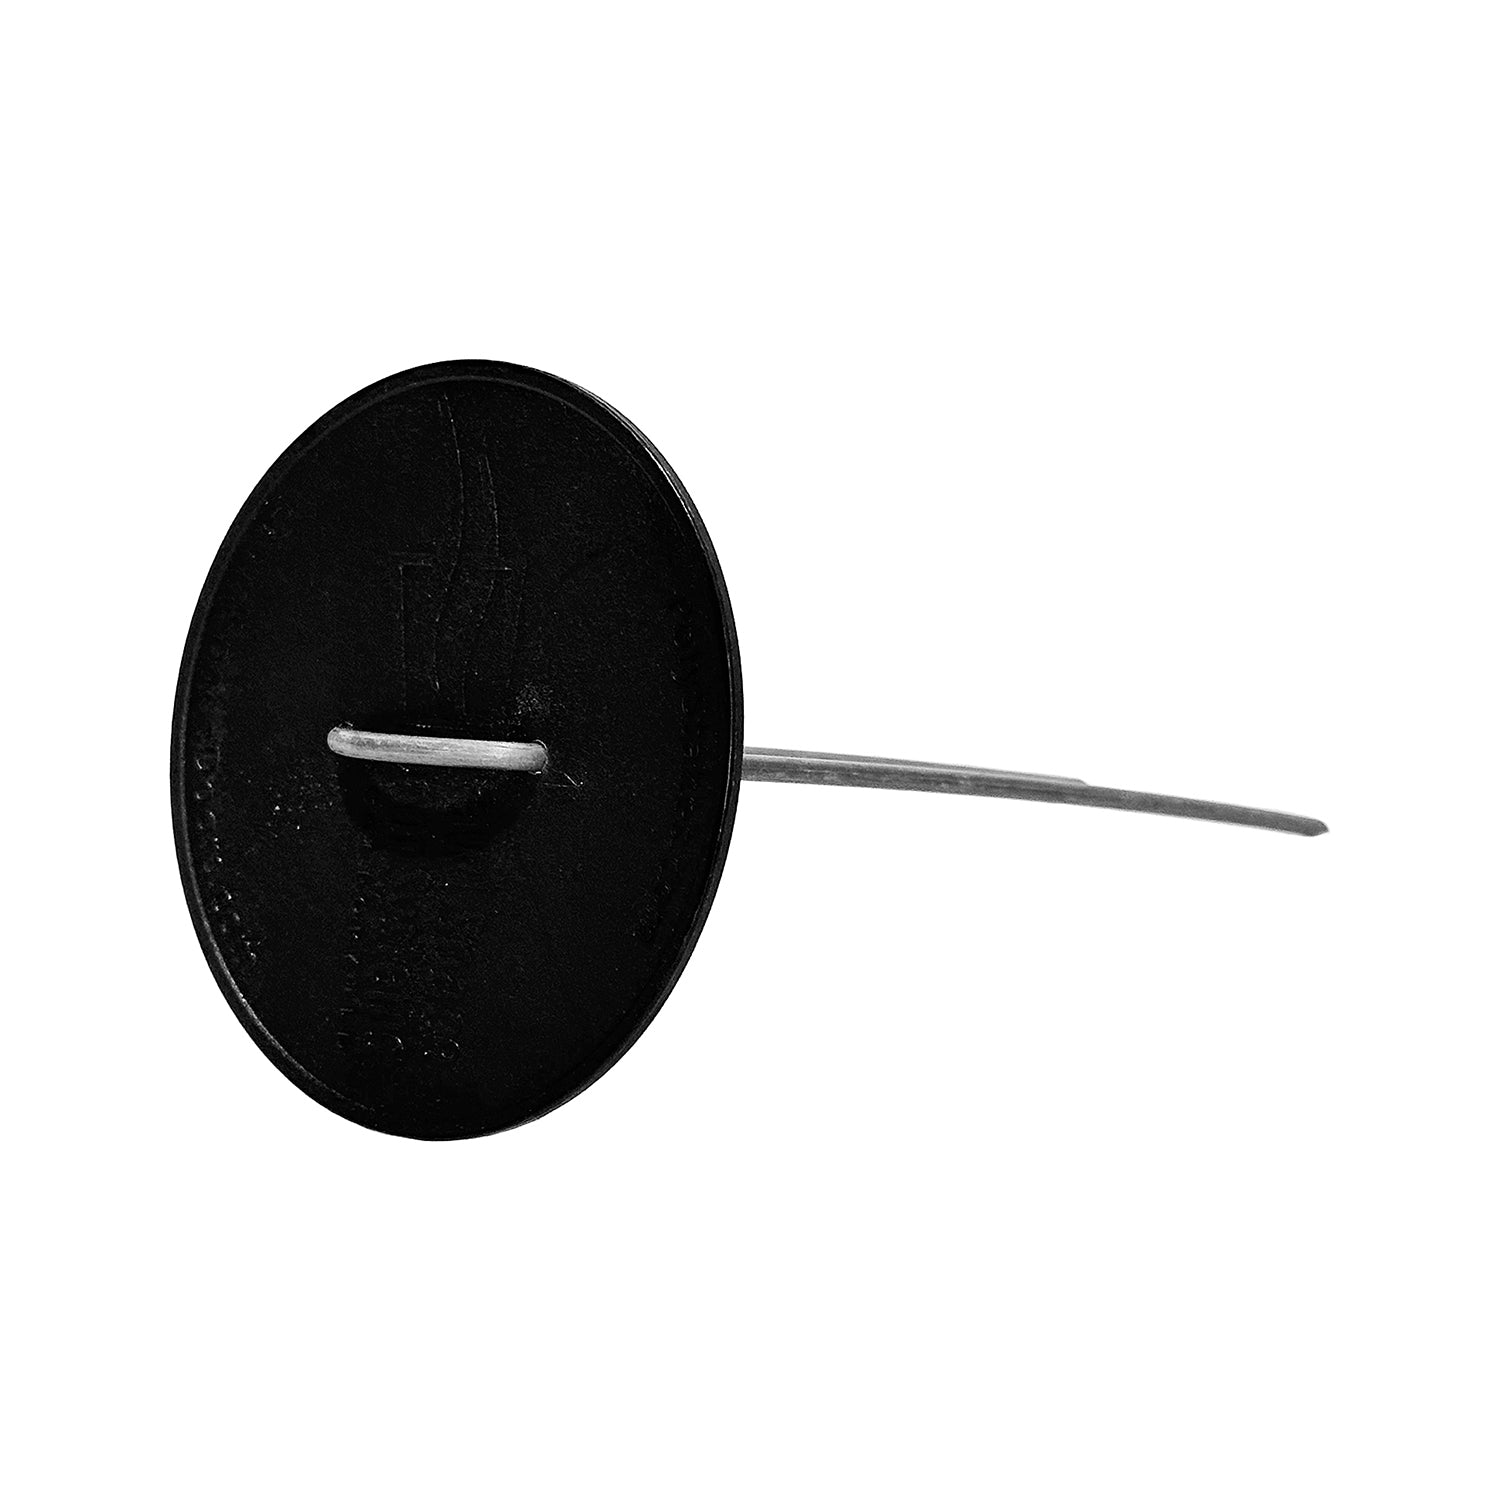 Vapor barrier stakes with black caps